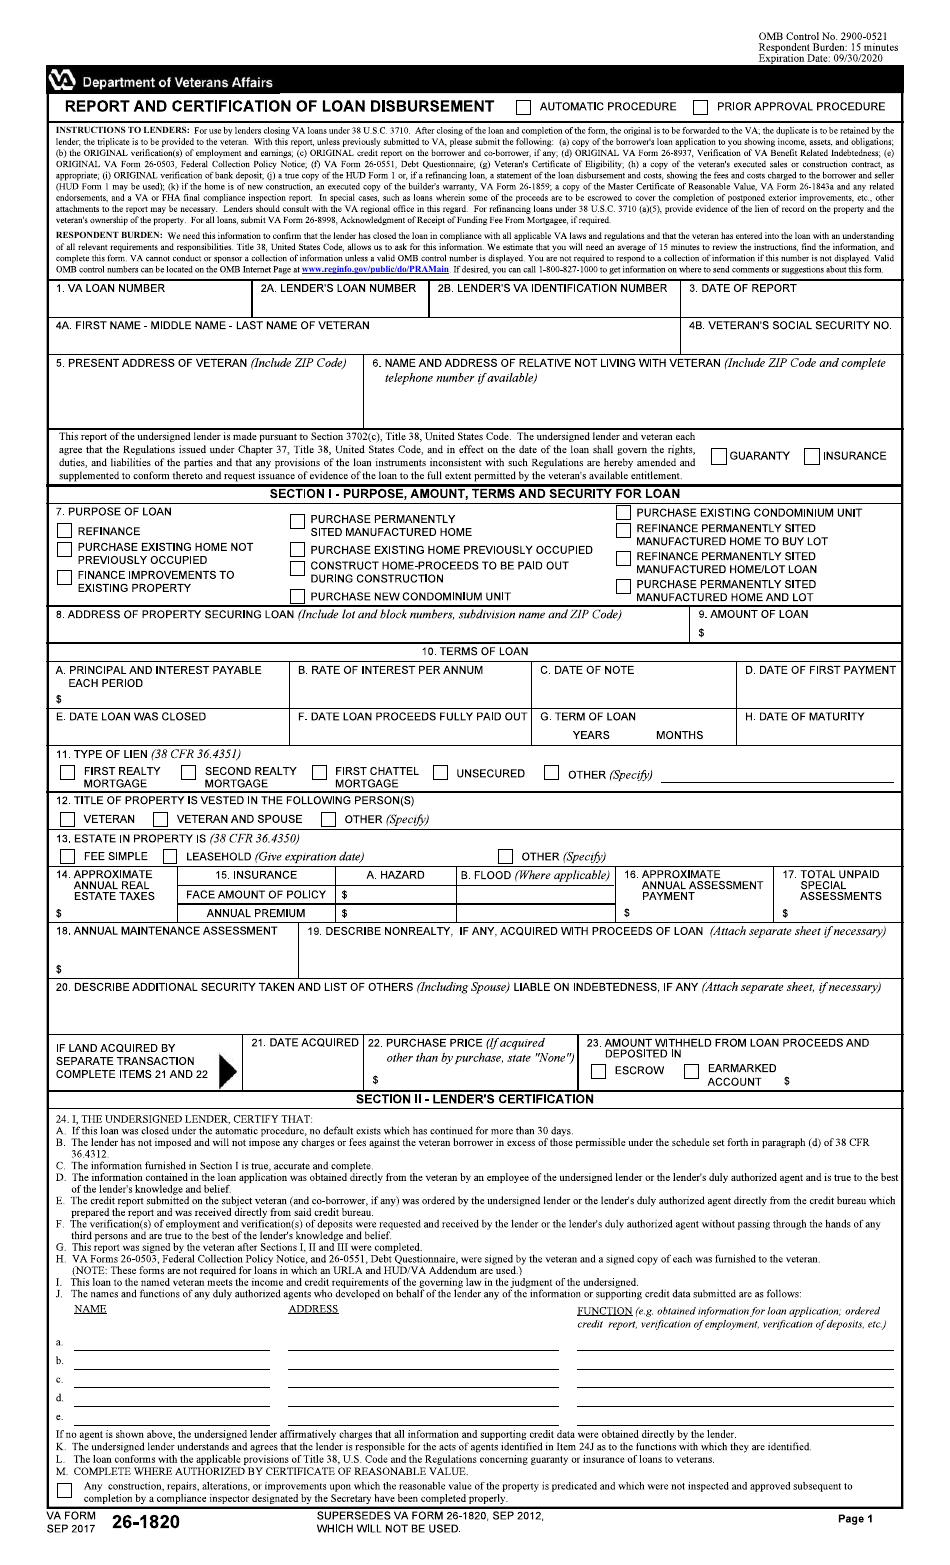 VA Form 26-1820 Report and Certification of Loan Disbursement, Page 1